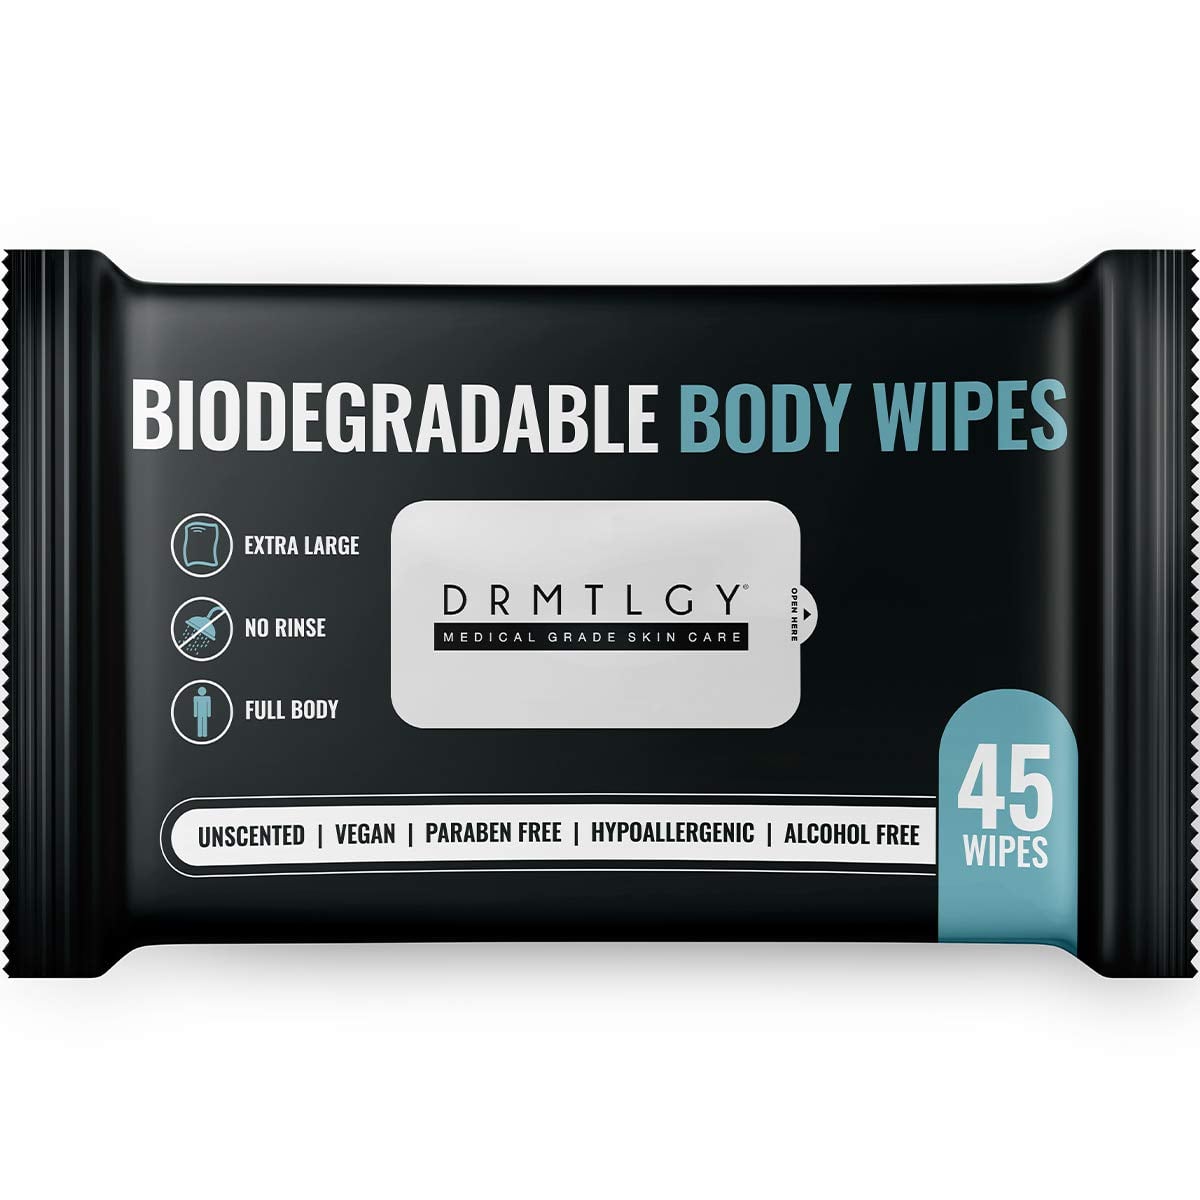 <p><a href="https://www.amazon.com/DRMTLGY-Body-Shower-Wipes-Women/dp/B081B99P7G">BUY NOW</a></p><p>$13</p><p><a href="https://www.amazon.com/DRMTLGY-Body-Shower-Wipes-Women/dp/B081B99P7G" class="ga-track"><strong>DRMTLGY Body Shower Wipes</strong></a> ($13)</p> <p>If you haven't had time to shower (don't worry, we won't tell), body wipes are the next best thing. These are biodegradable, and unscented, which is helpful for folks with sensitive skin.</p>